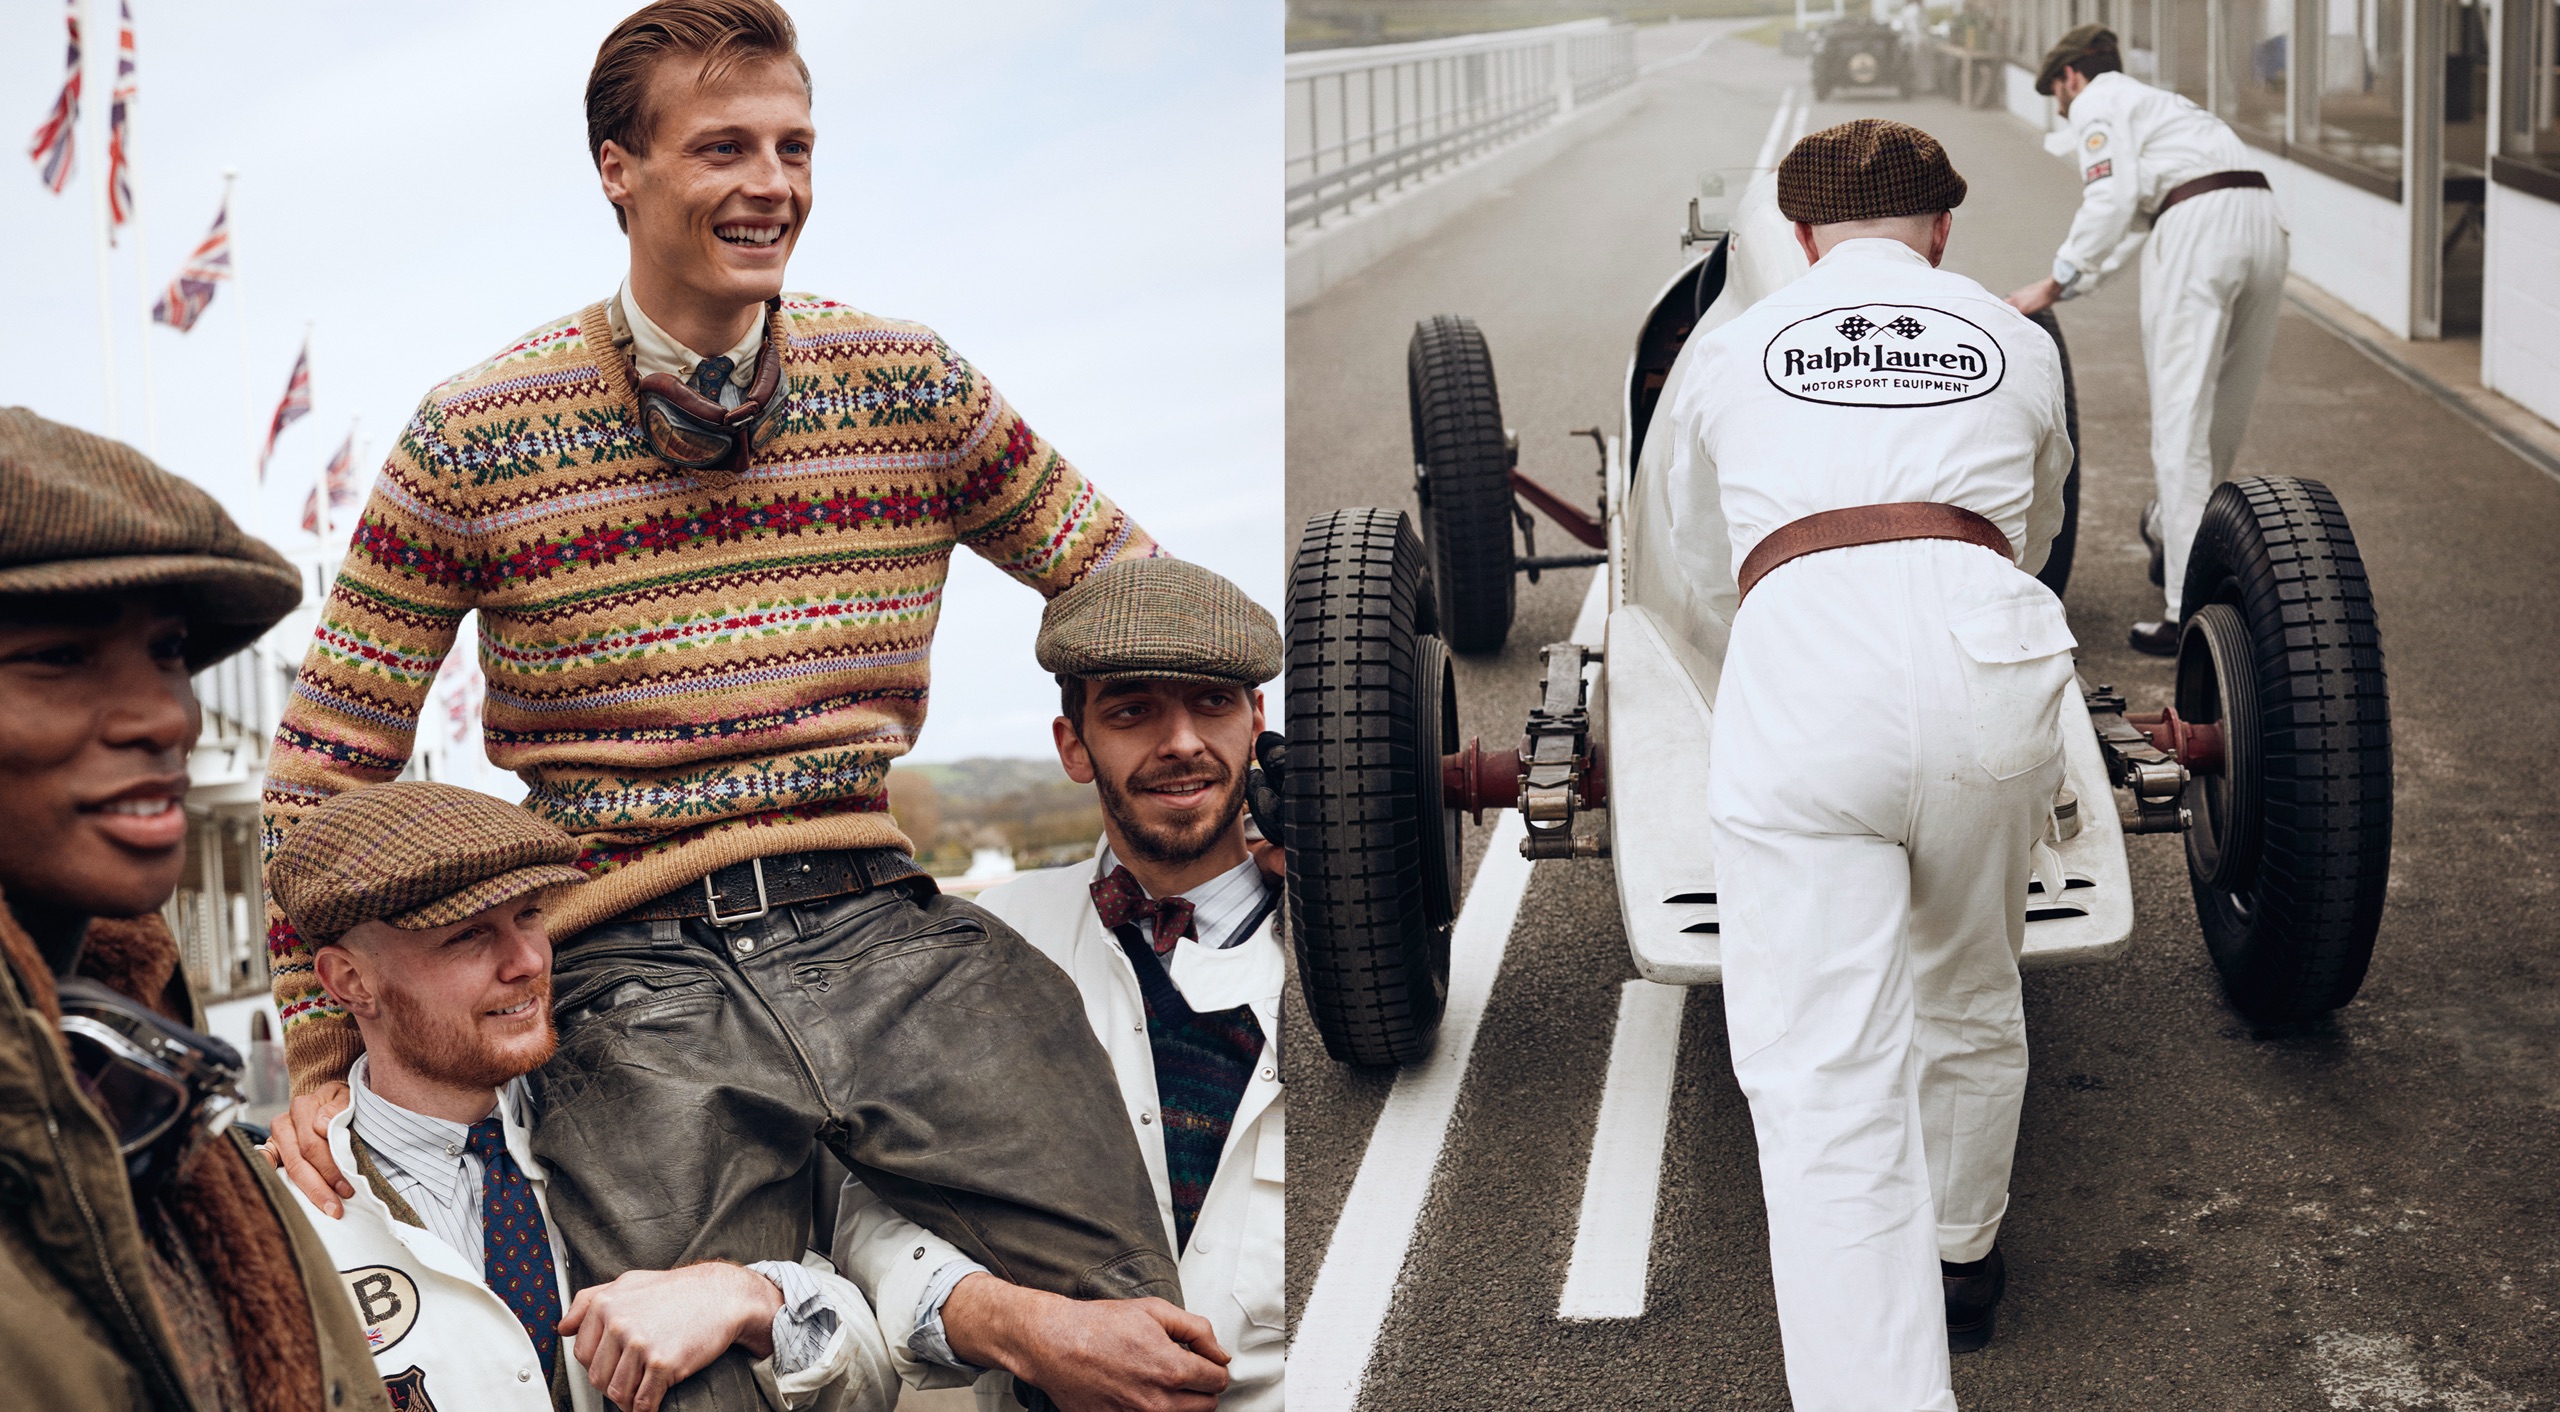 <strong>ON LOCATION</strong><br/><span>This season of Polo Originals, inspired by the golden era of Grand Prix car racing, was photographed at the Goodwood Motor Circuit, which is located in West Sussex, on the 12,000-acre Goodwood Estate. The Circuit has since become known for hosting a number of prestigious motorsport events, including the famous Festival of Speed and Revival.</span> <br/><rlmag_link href="https://www.ralphlauren.global/dz/en/search?cgid=brands-prl-tough-and-refined-cg"><button class="shop-collection">Shop the Story</button></rlmag_link>